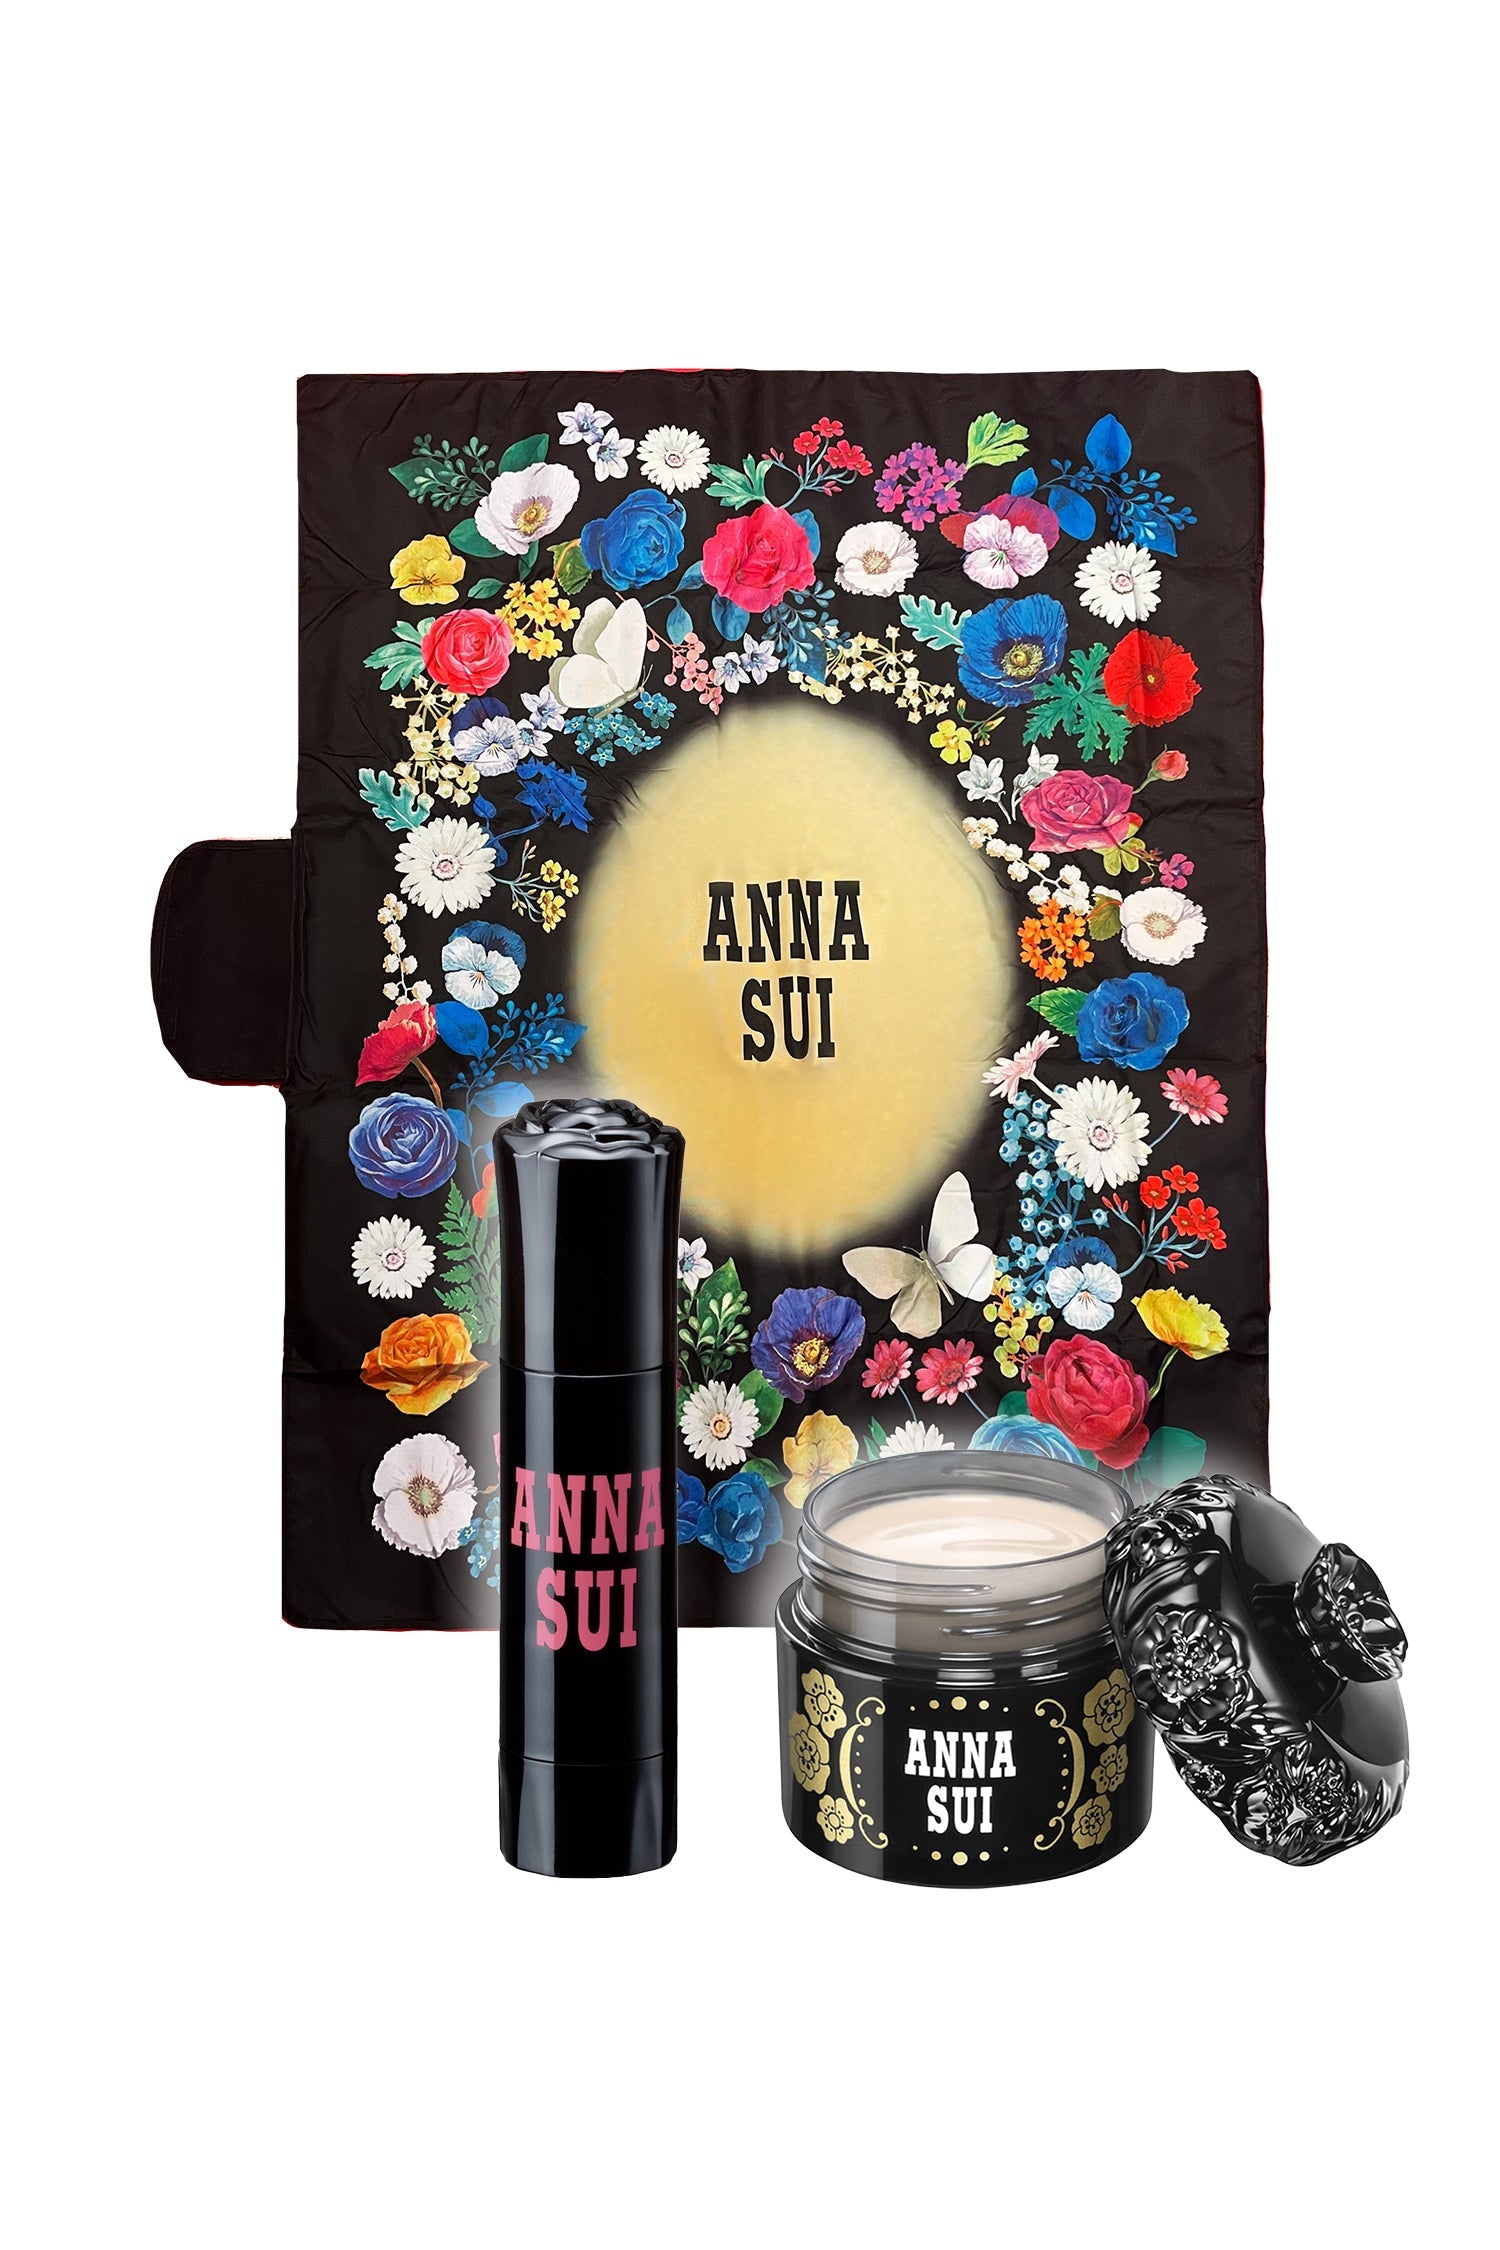 ROSE light cheek and primer set, the Anna Sui on cylinder case with a rose on top plus a black round case  